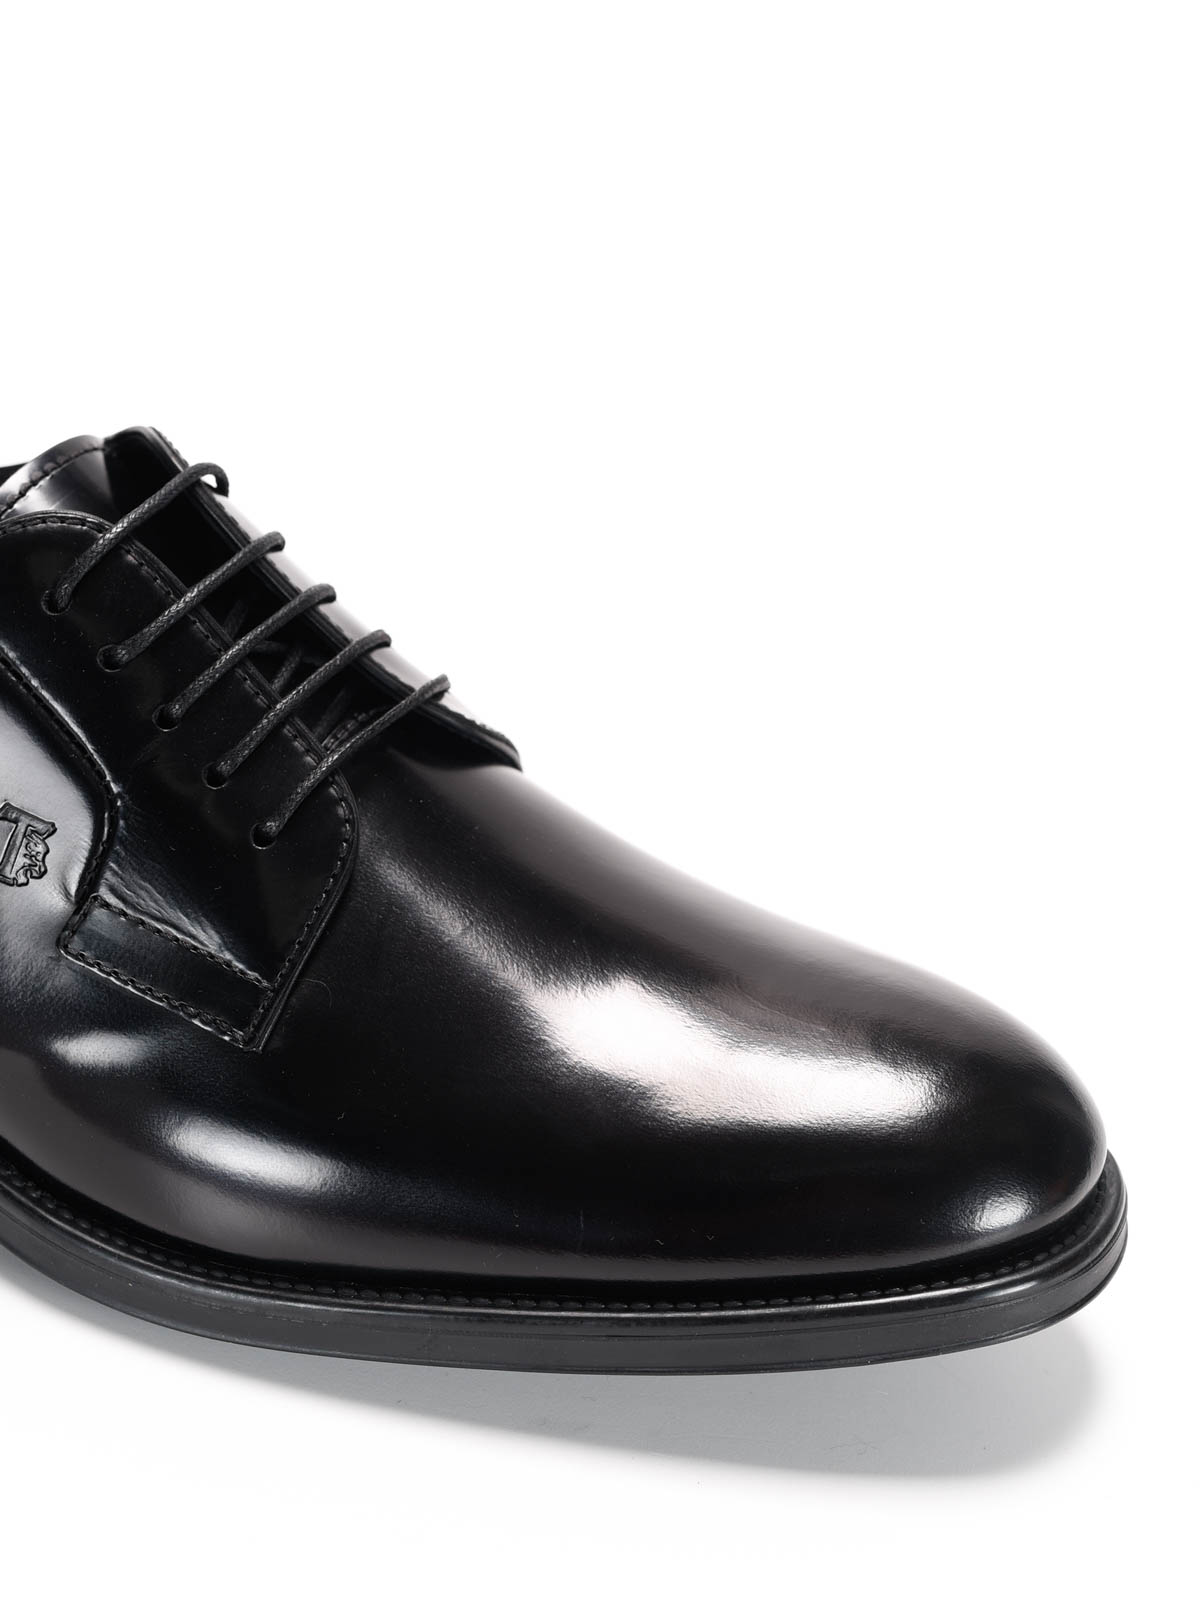 tod's classic shoes